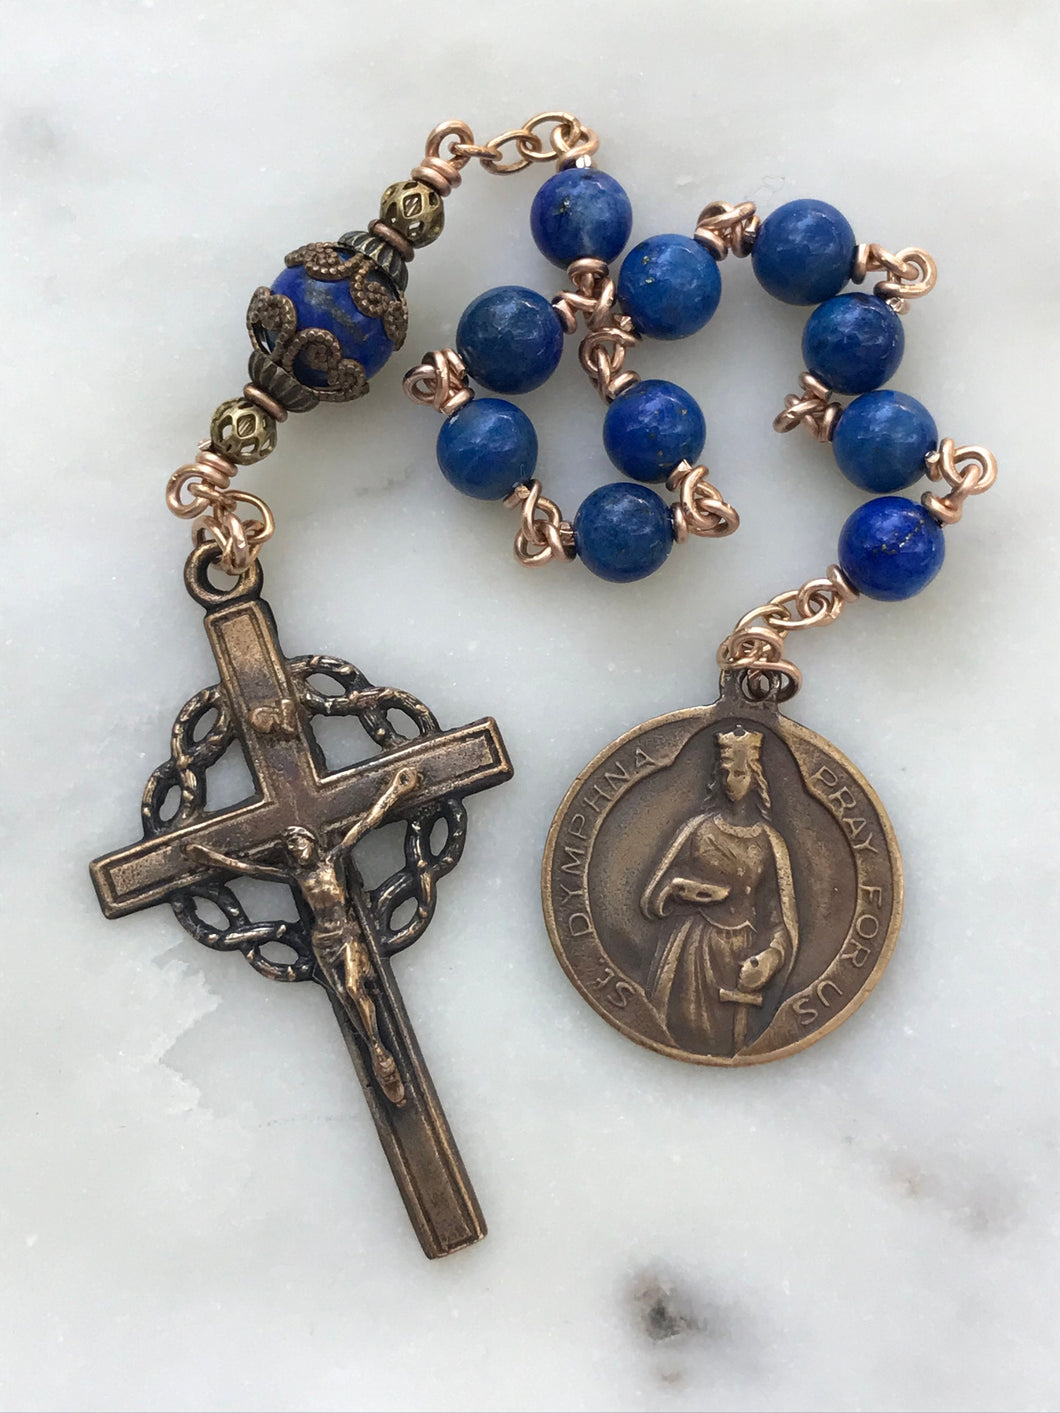 Saint Dymphna Rosary - Lapis and Bronze - One Decade Rosary - Pocket Rosary - Crown of Thorns Crucifix CeCeAgnes